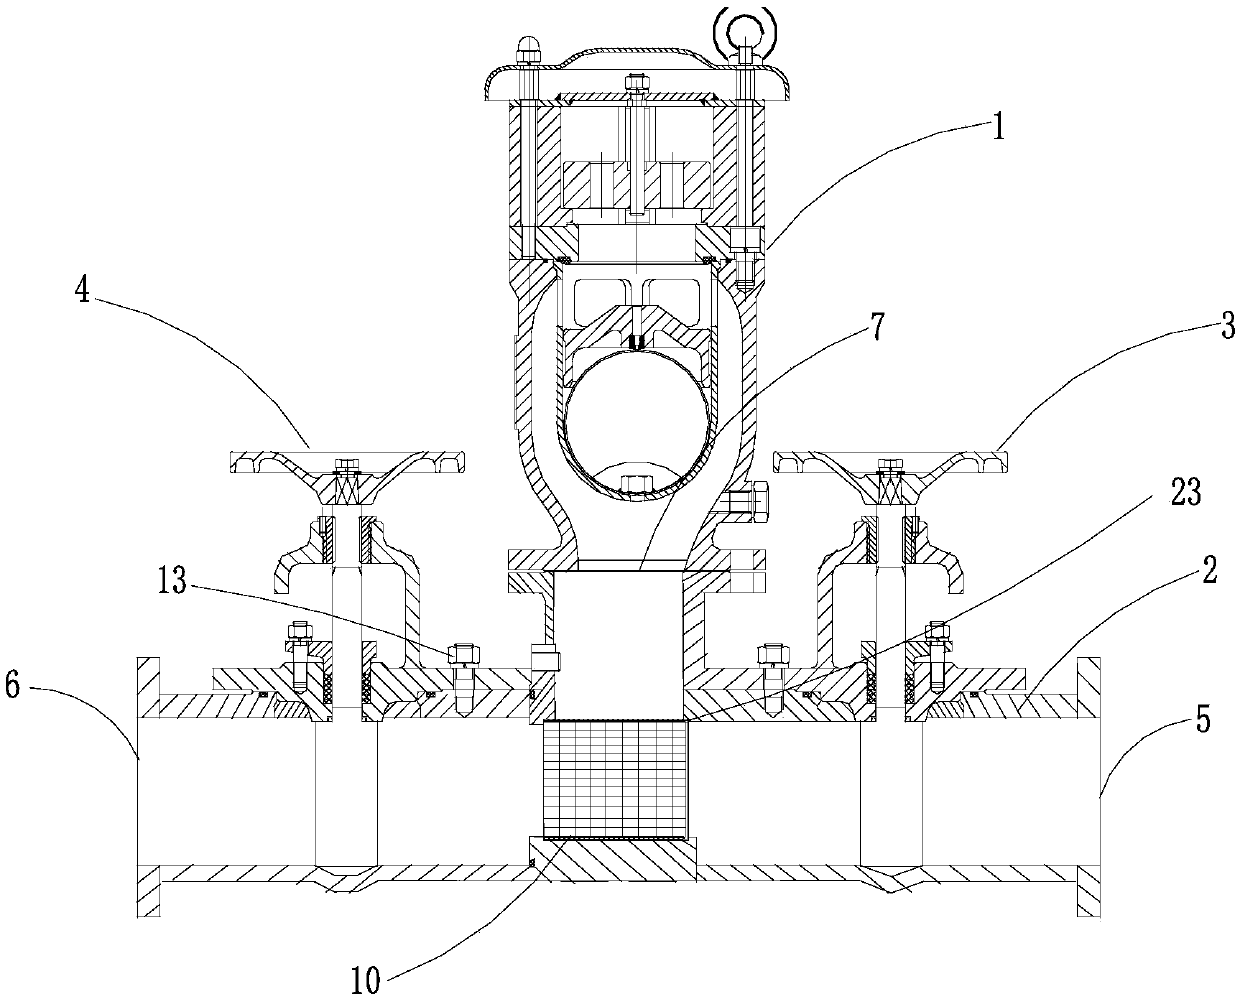 Air valve unit with functions of maintenance, filtering and reverse cleaning